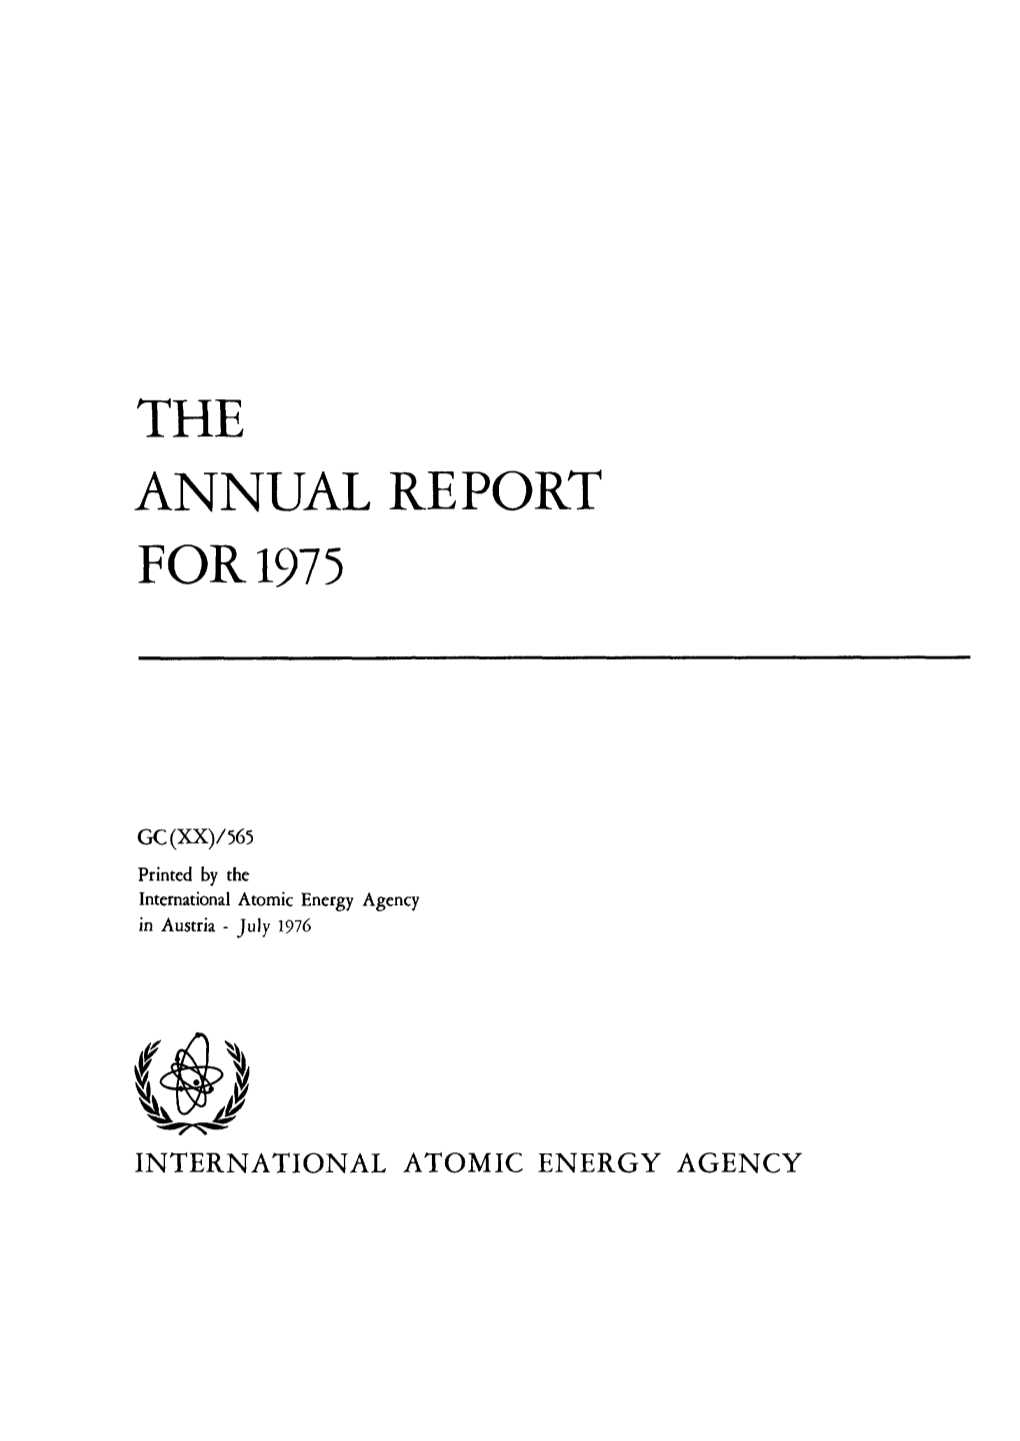 The Annual Report for 1975